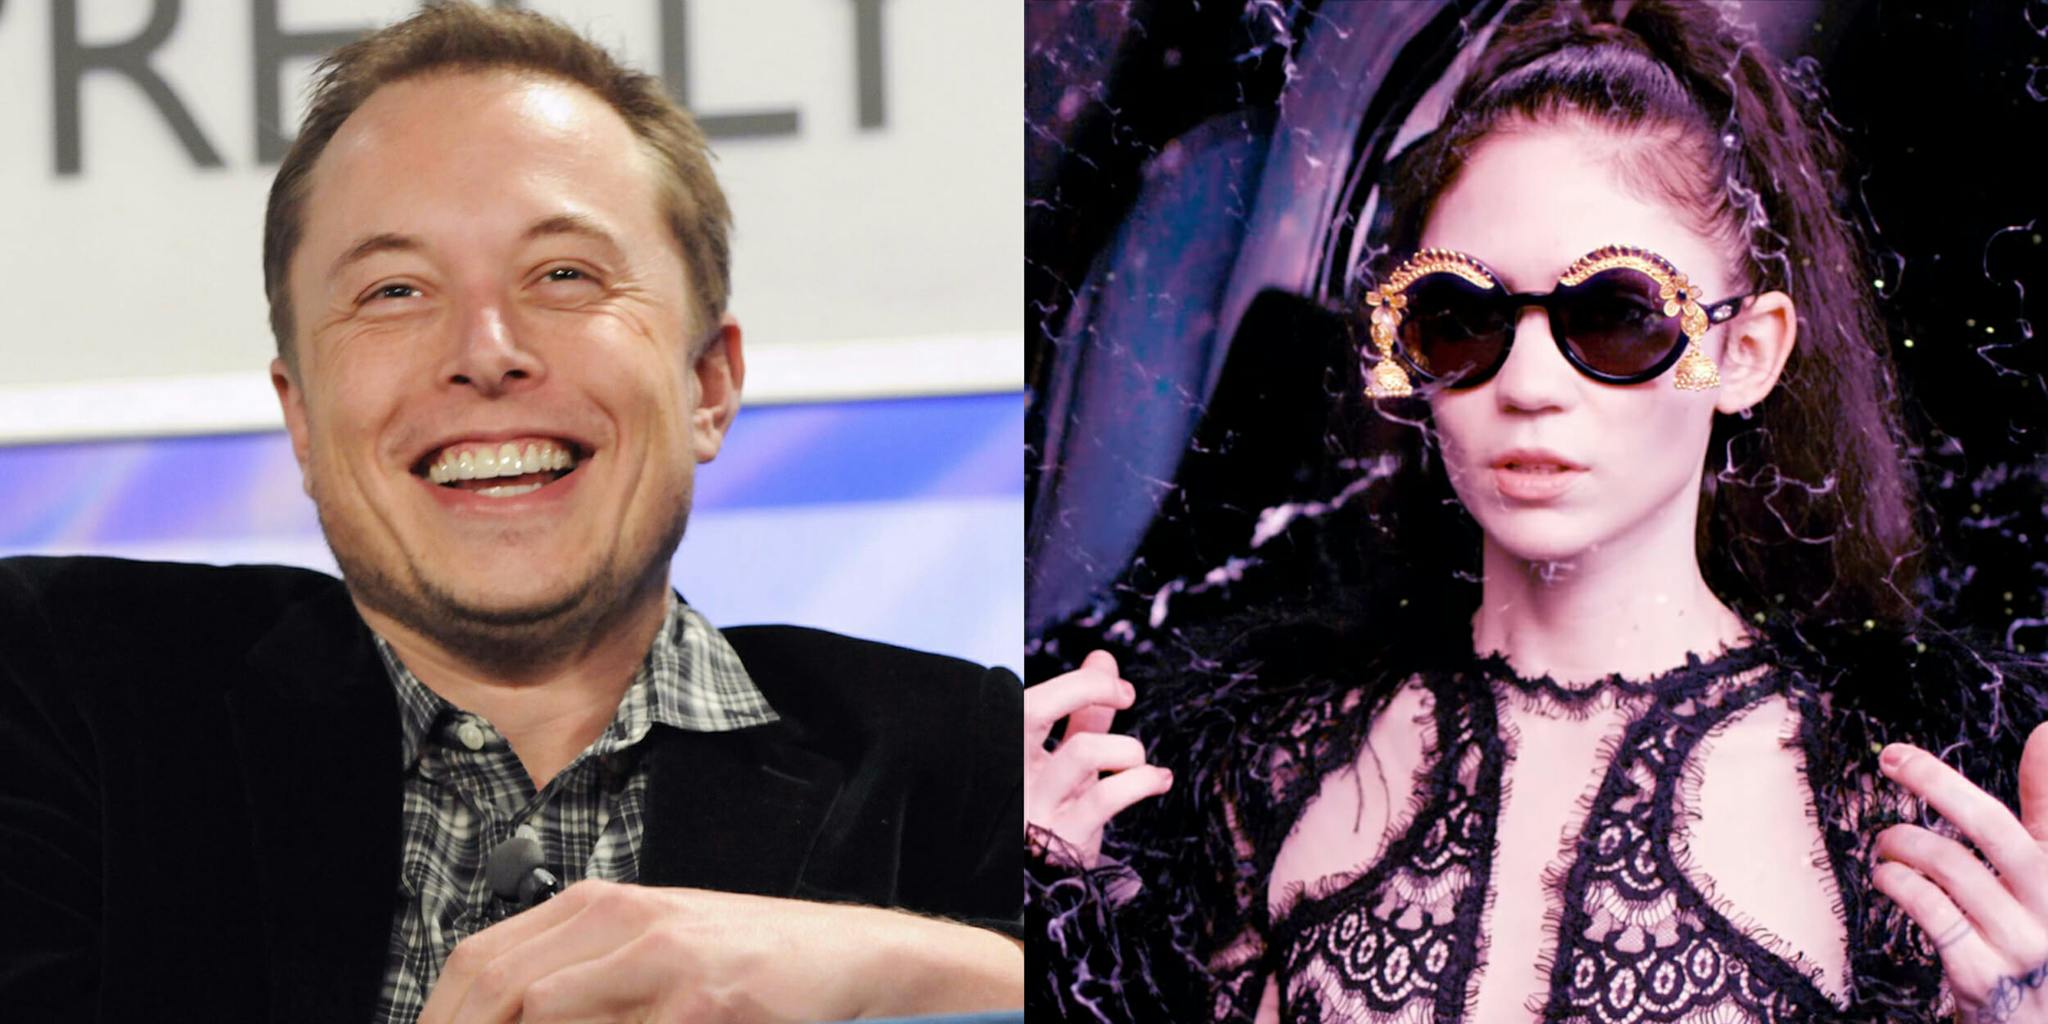 Elon Musk and Grimes Are a Couple, and Twitter Can't Handle It